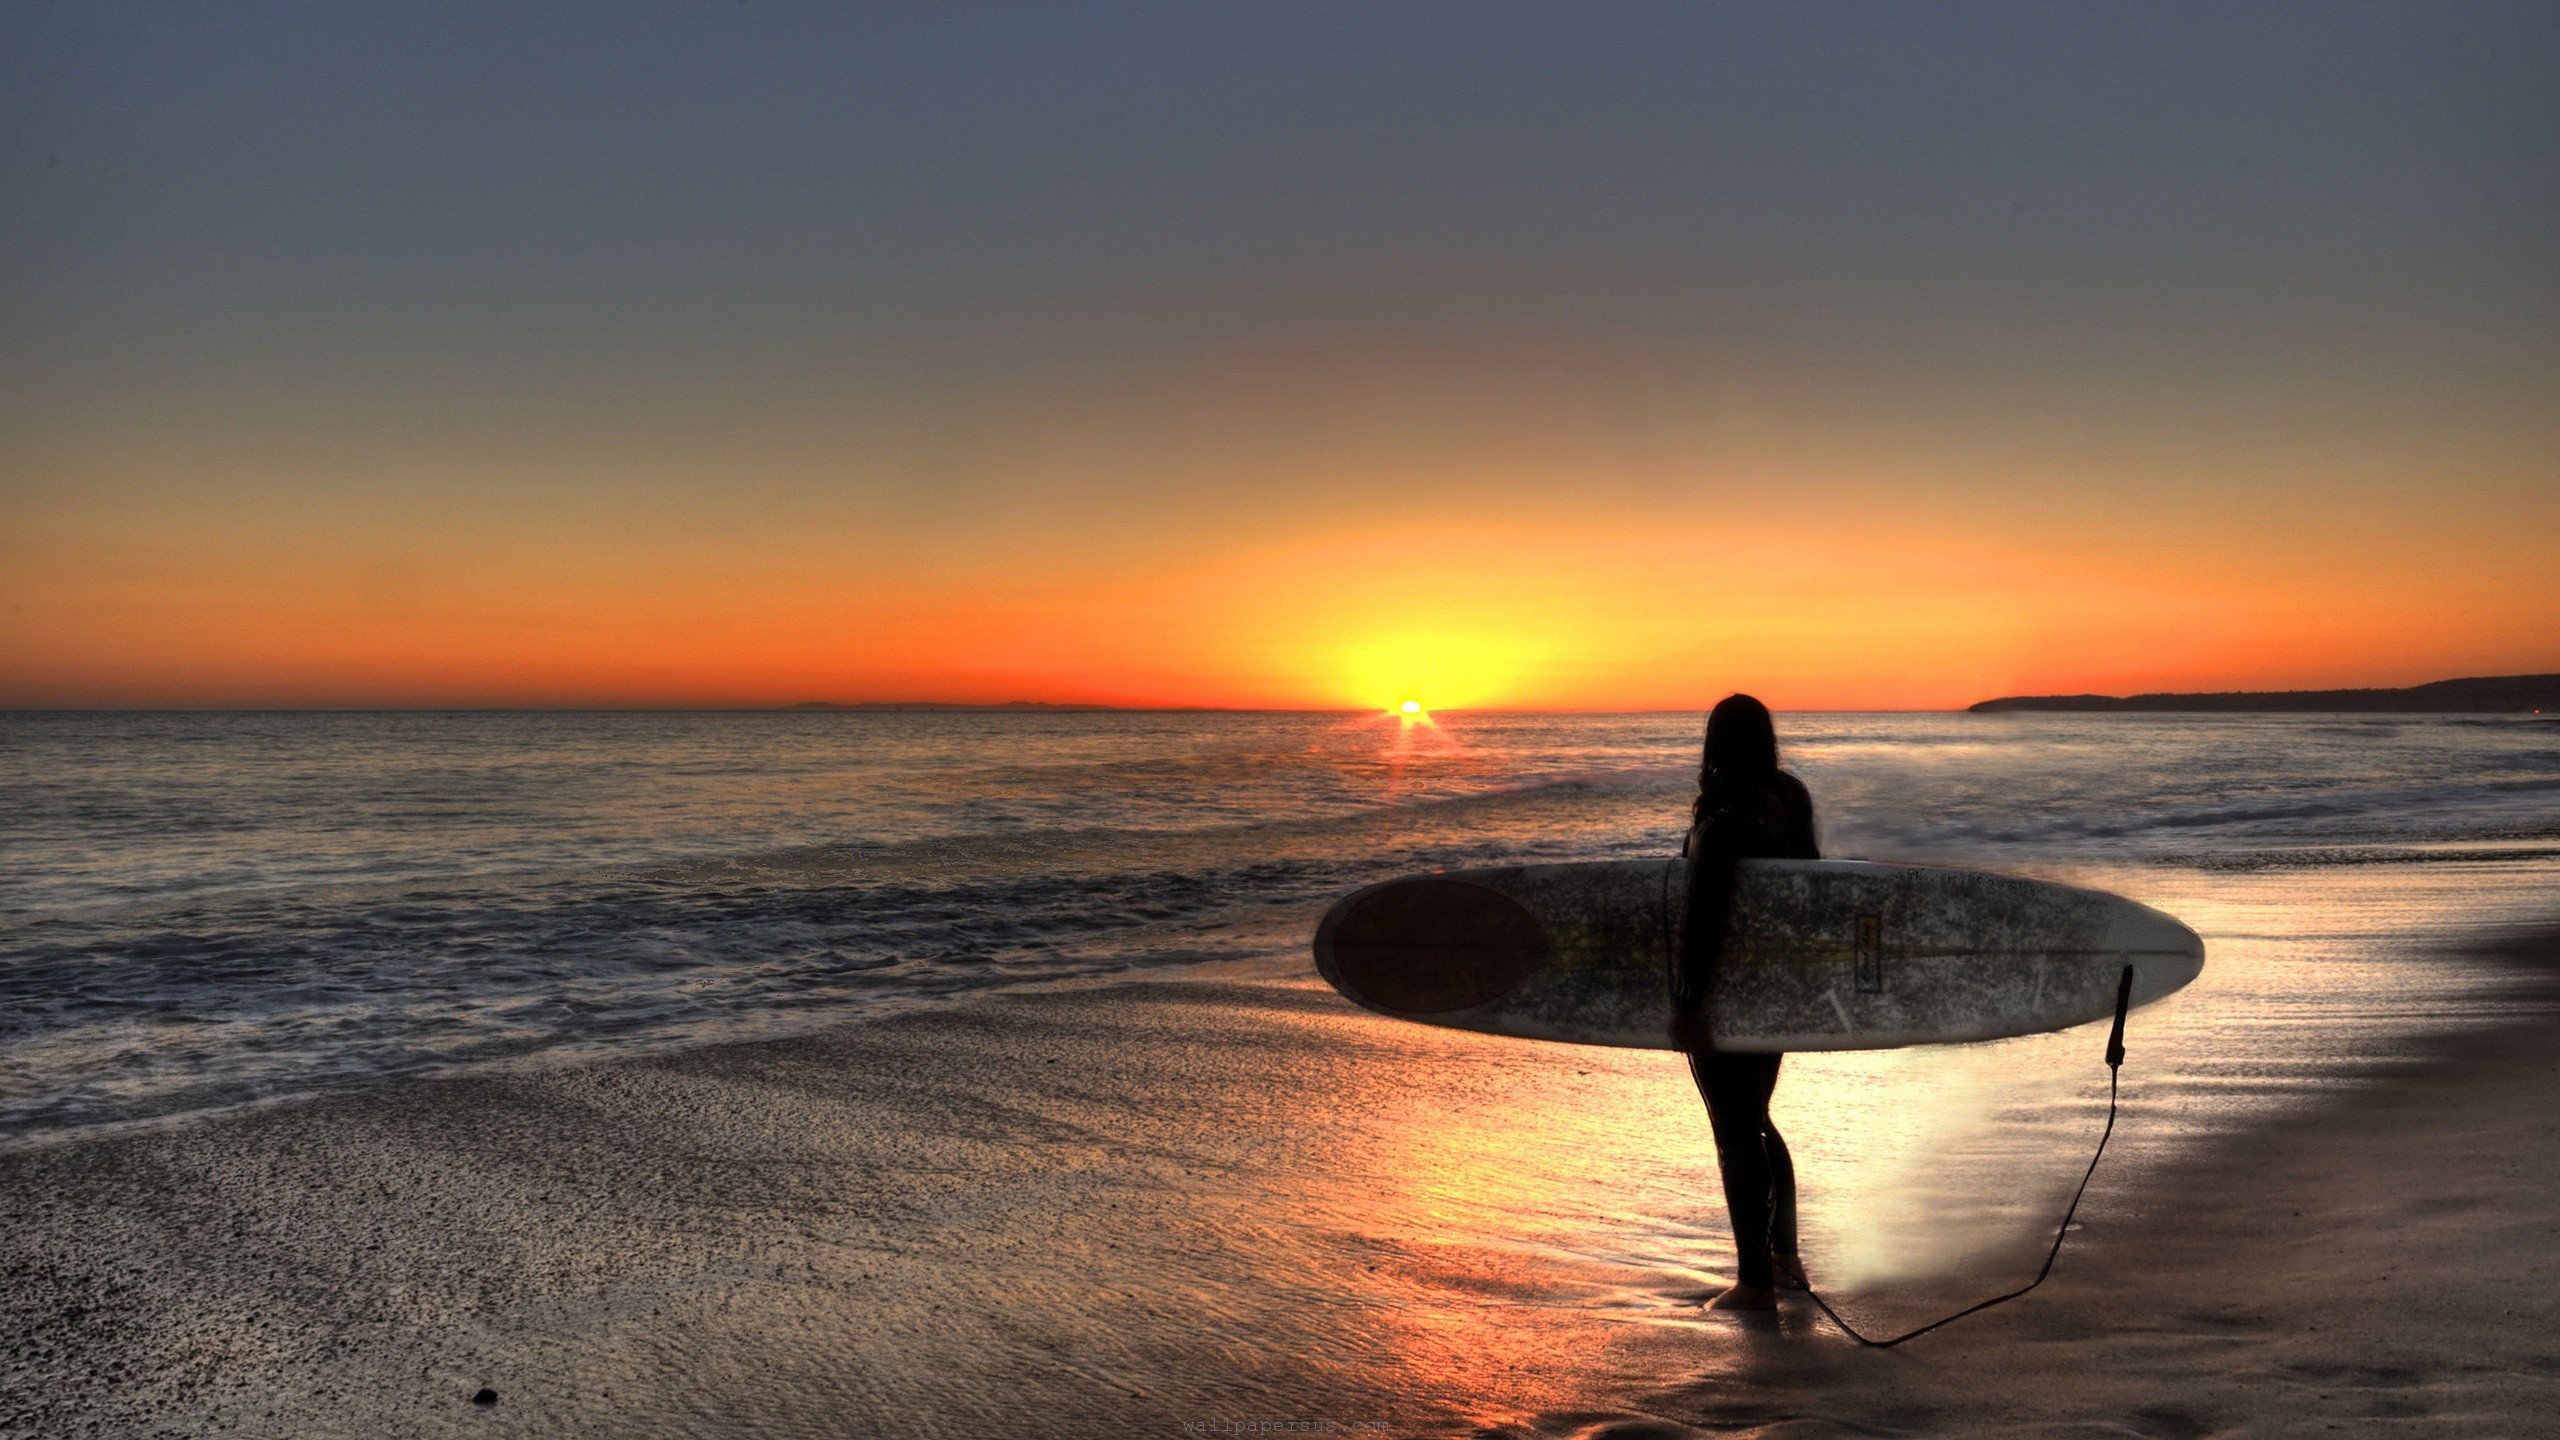 The Surfing Day Is Over Hd Wallpaper Sport / Surfing - Beach Surfing Backgrounds - HD Wallpaper 